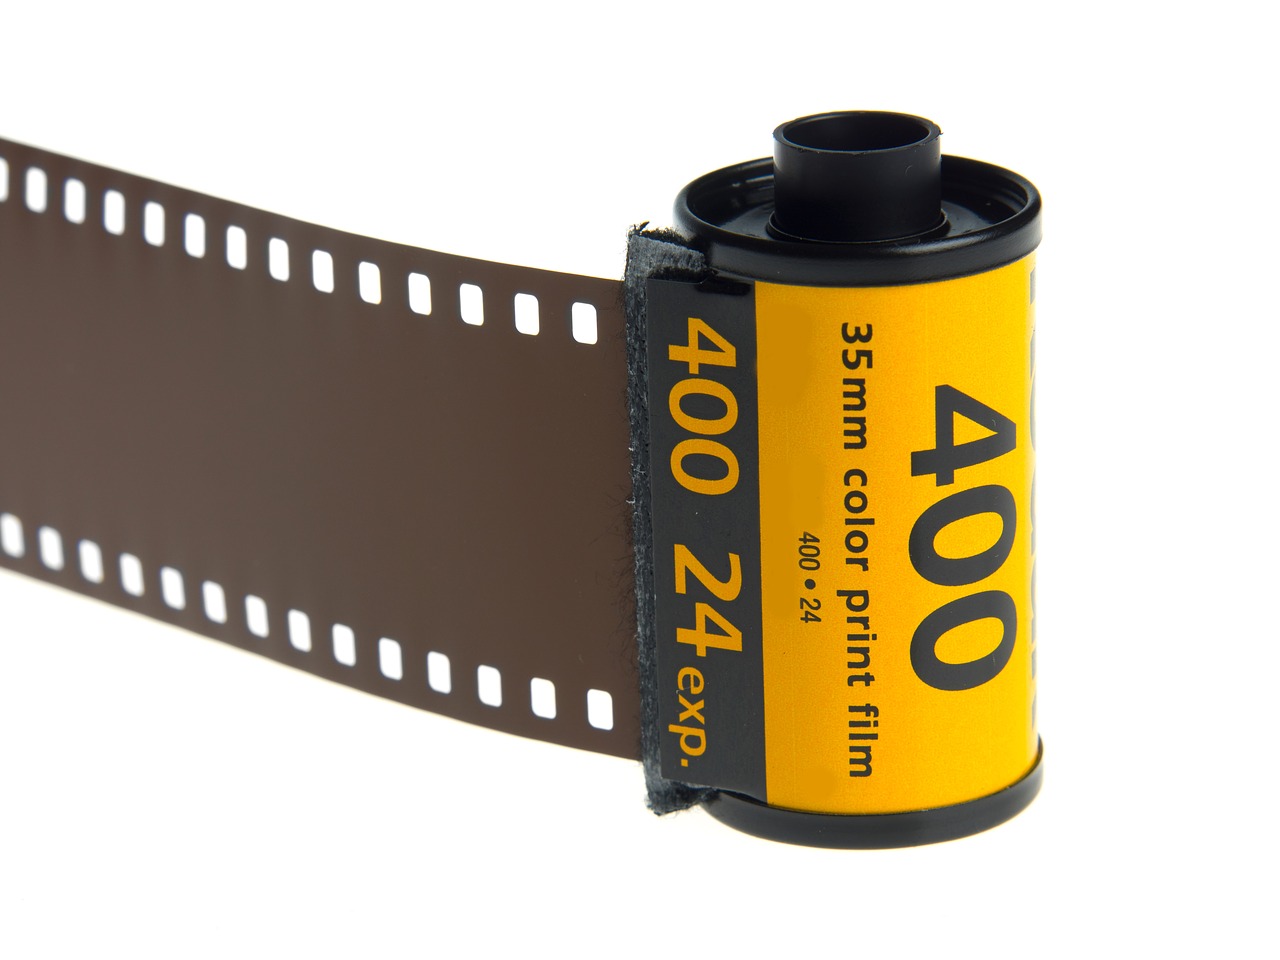 a roll of film with a yellow and black label